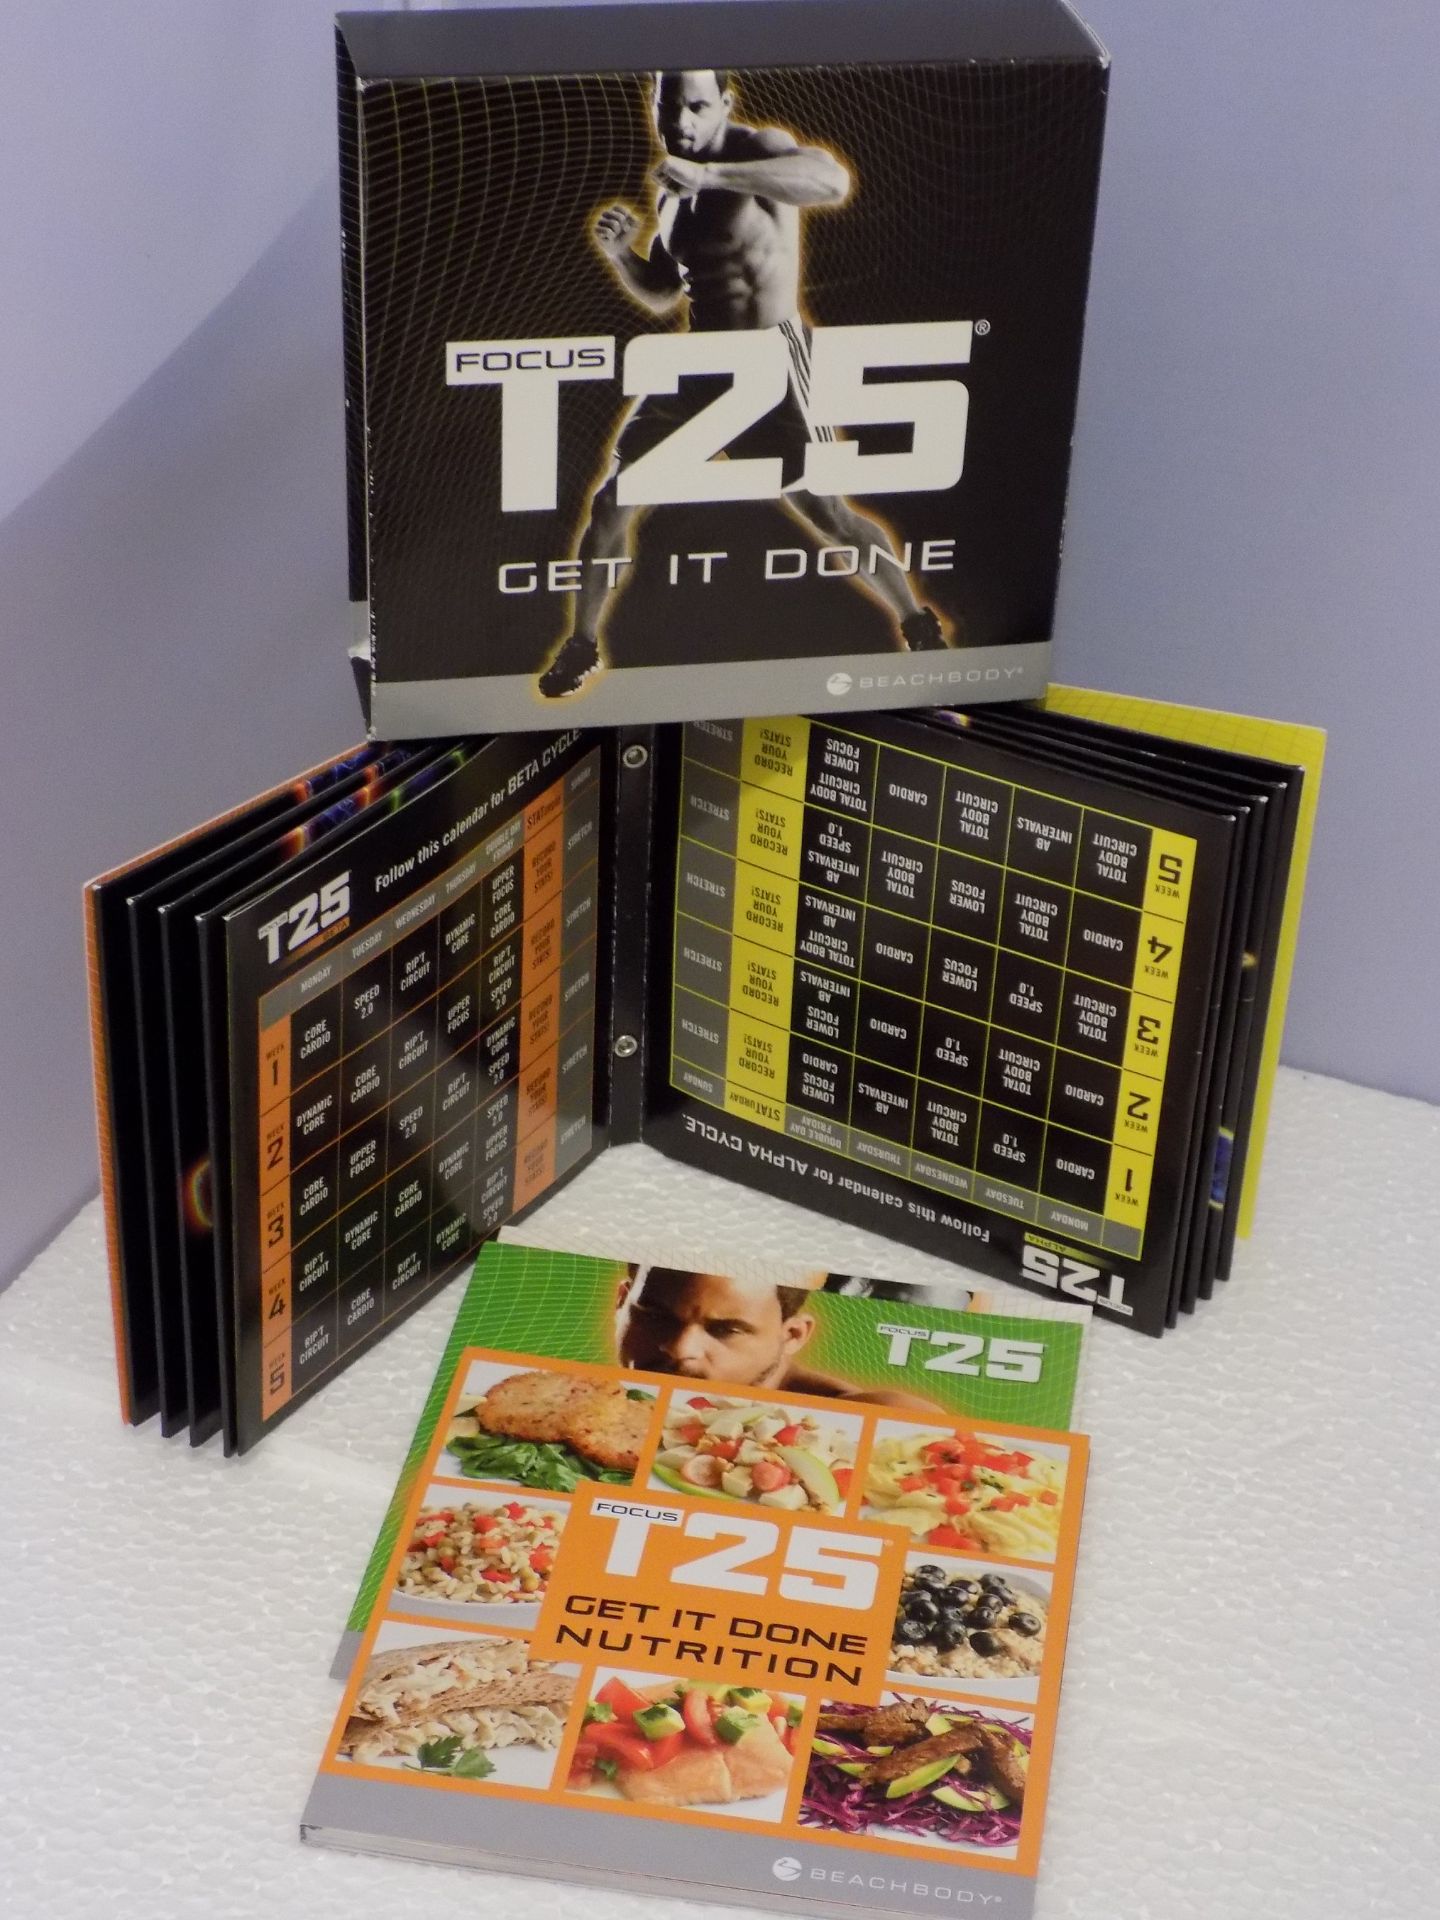 SHAUN T's FOCUS T25 HOME FITNESS DVD PACK